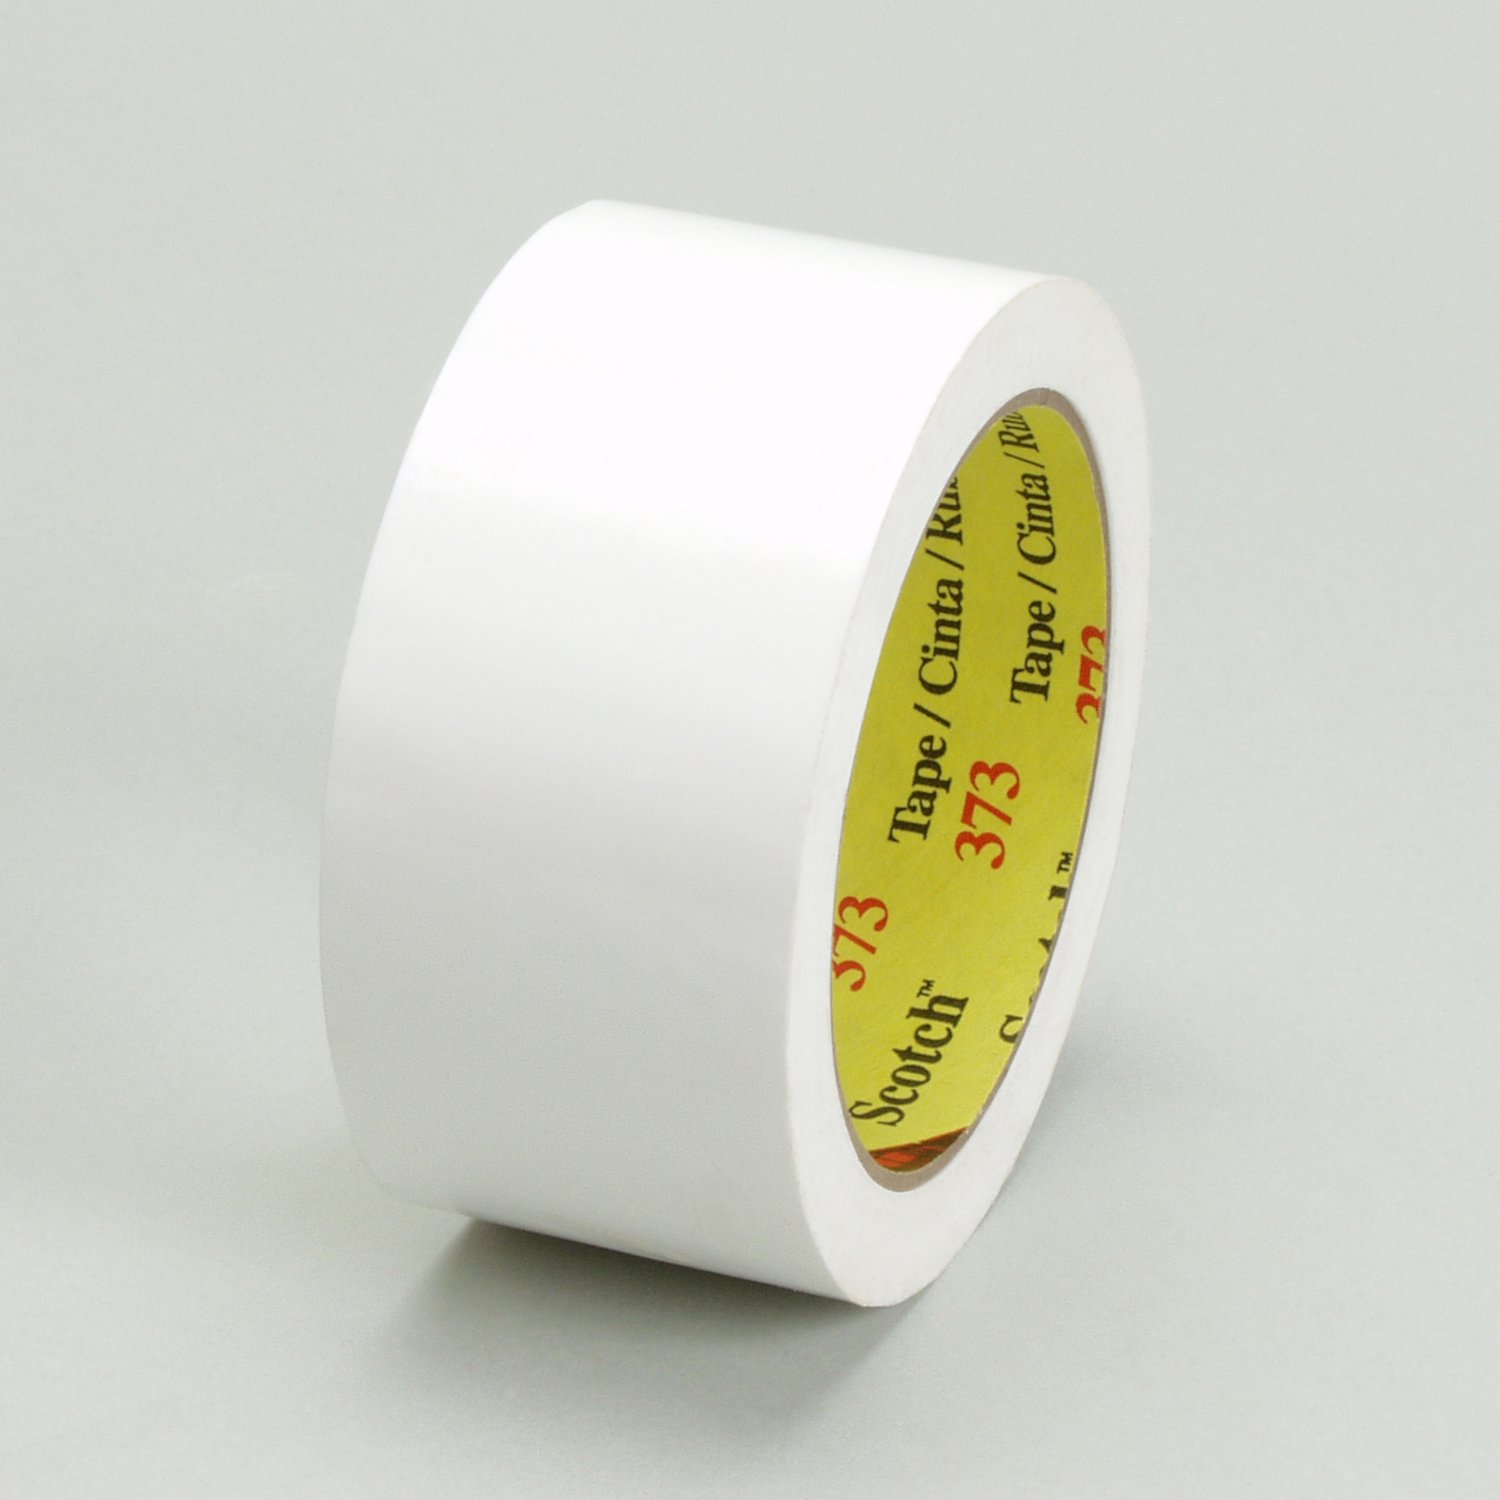 3M™ High Performance Double Coated Tape 9088-200, Clear, 1550 mm x